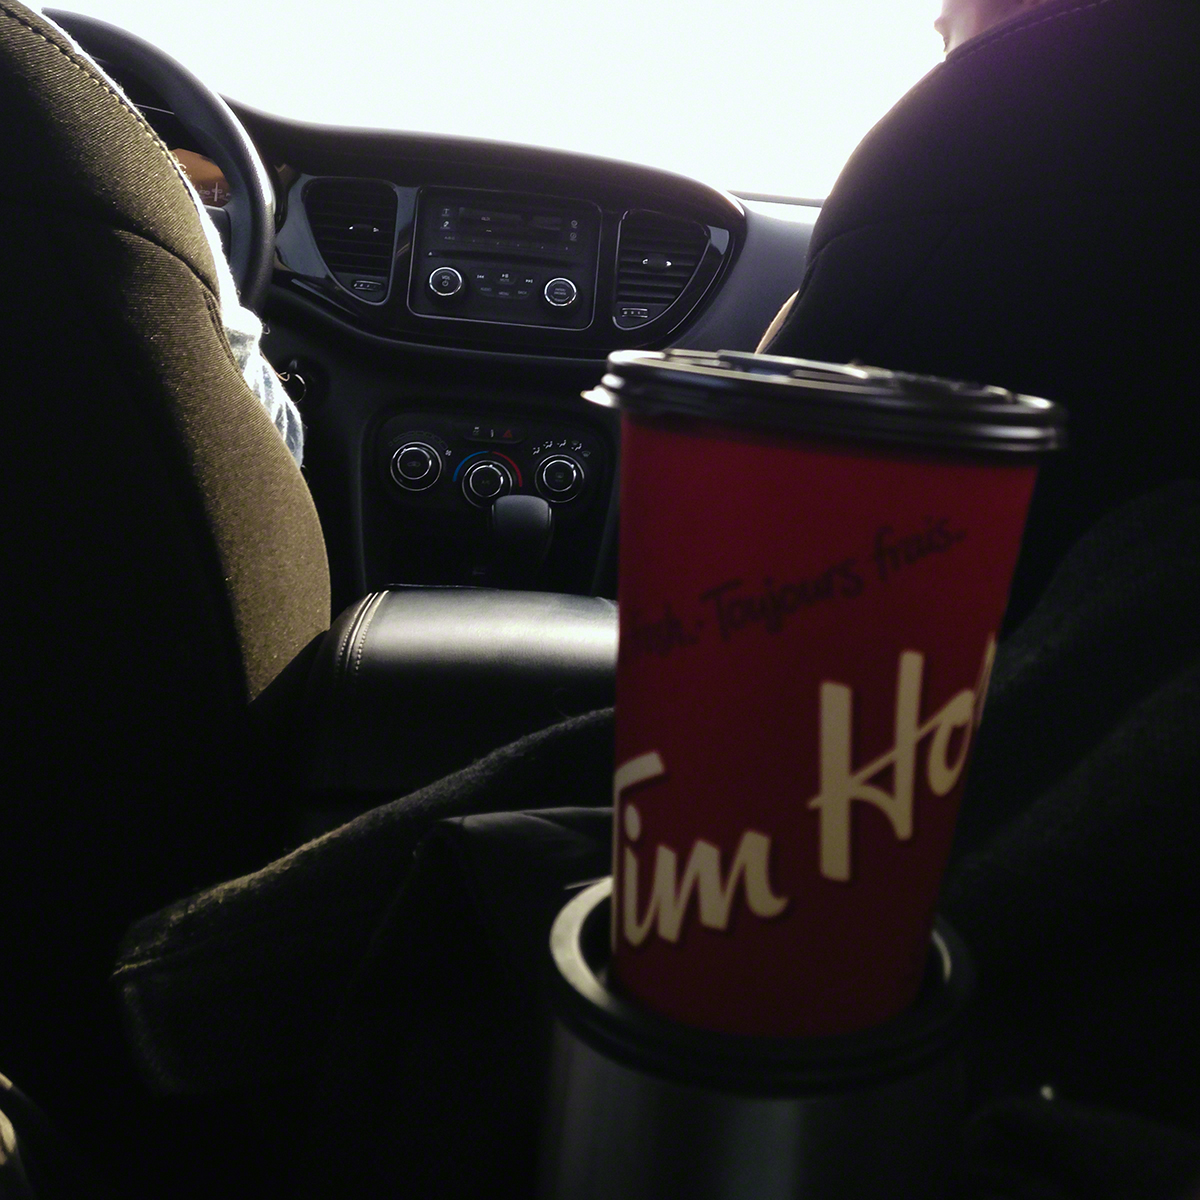 Timmies...of course